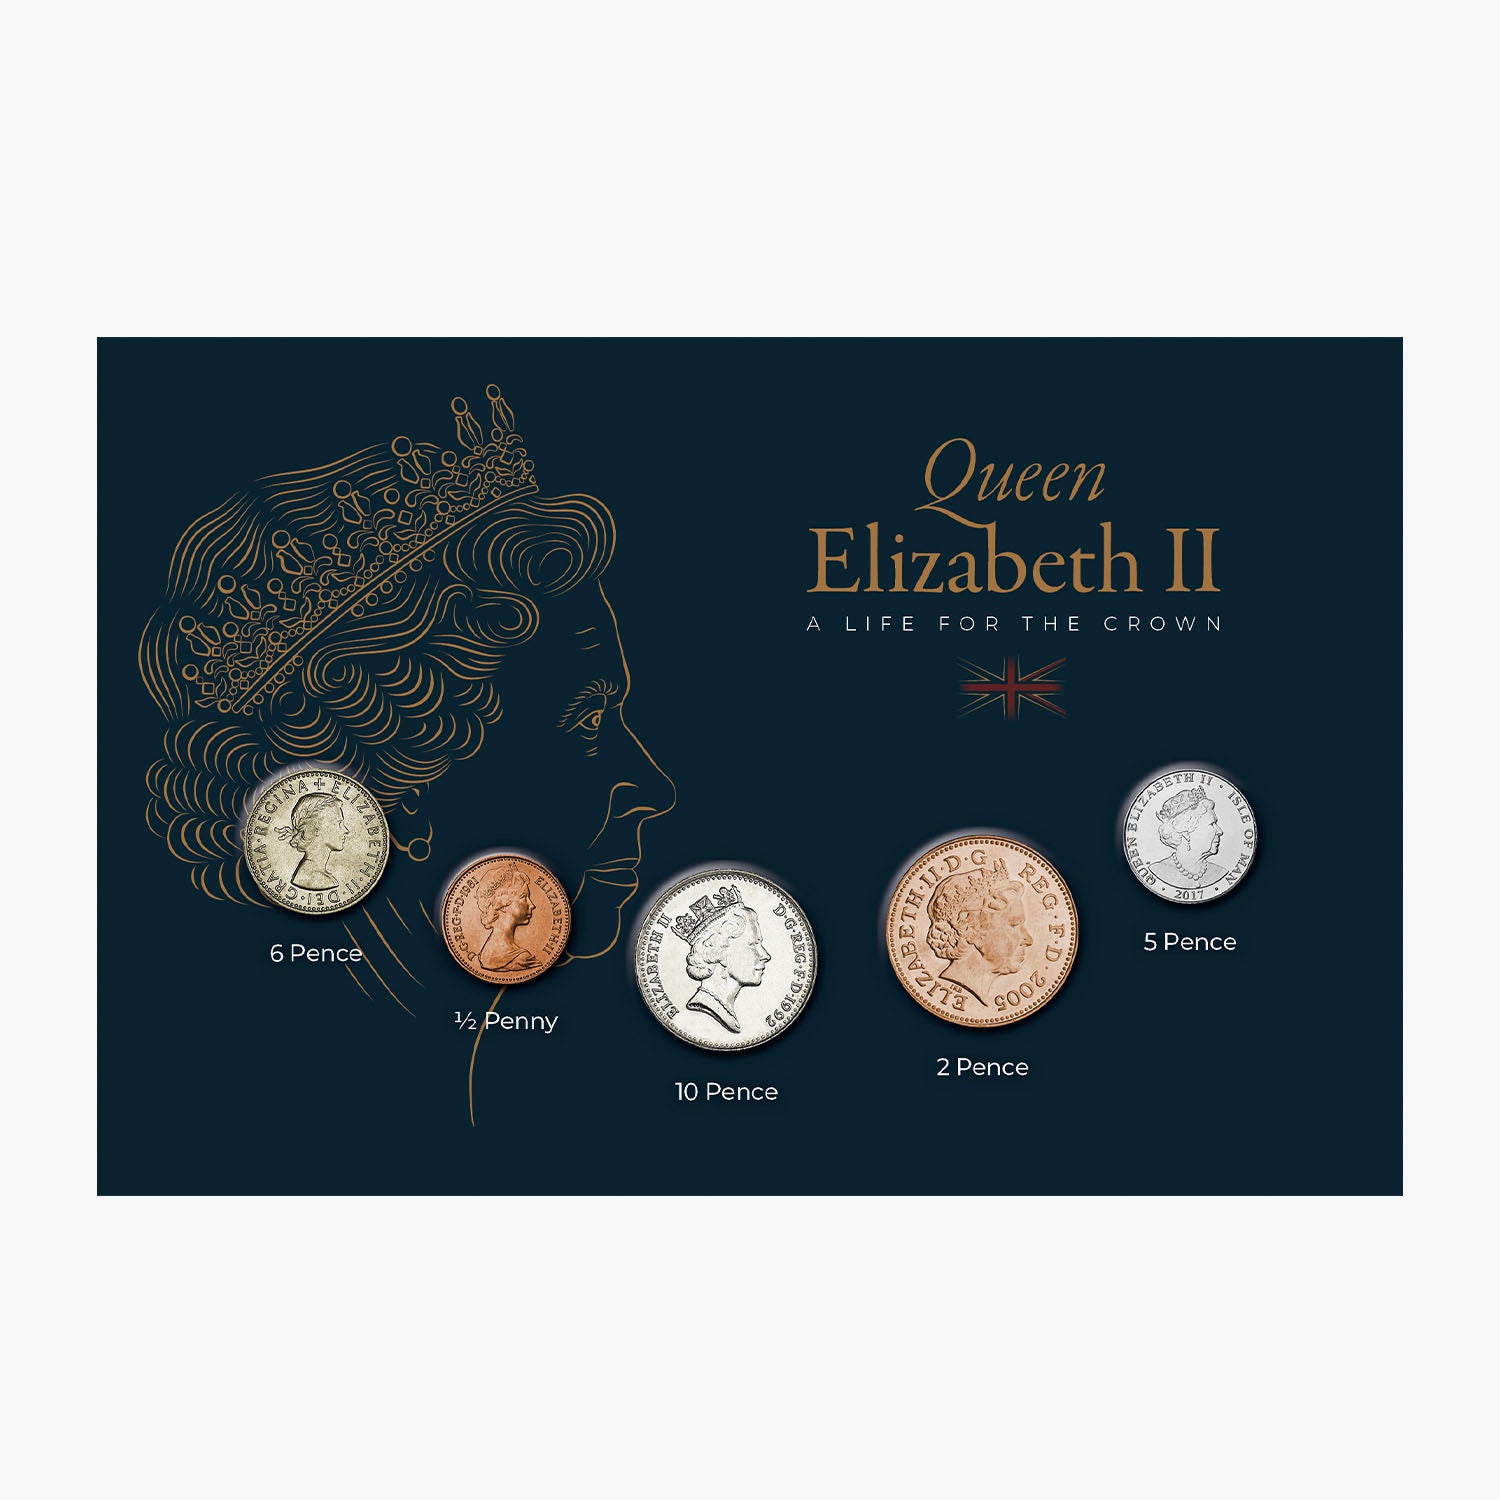 Queen Elizabeth II Coin Collection: A Life for the Crown